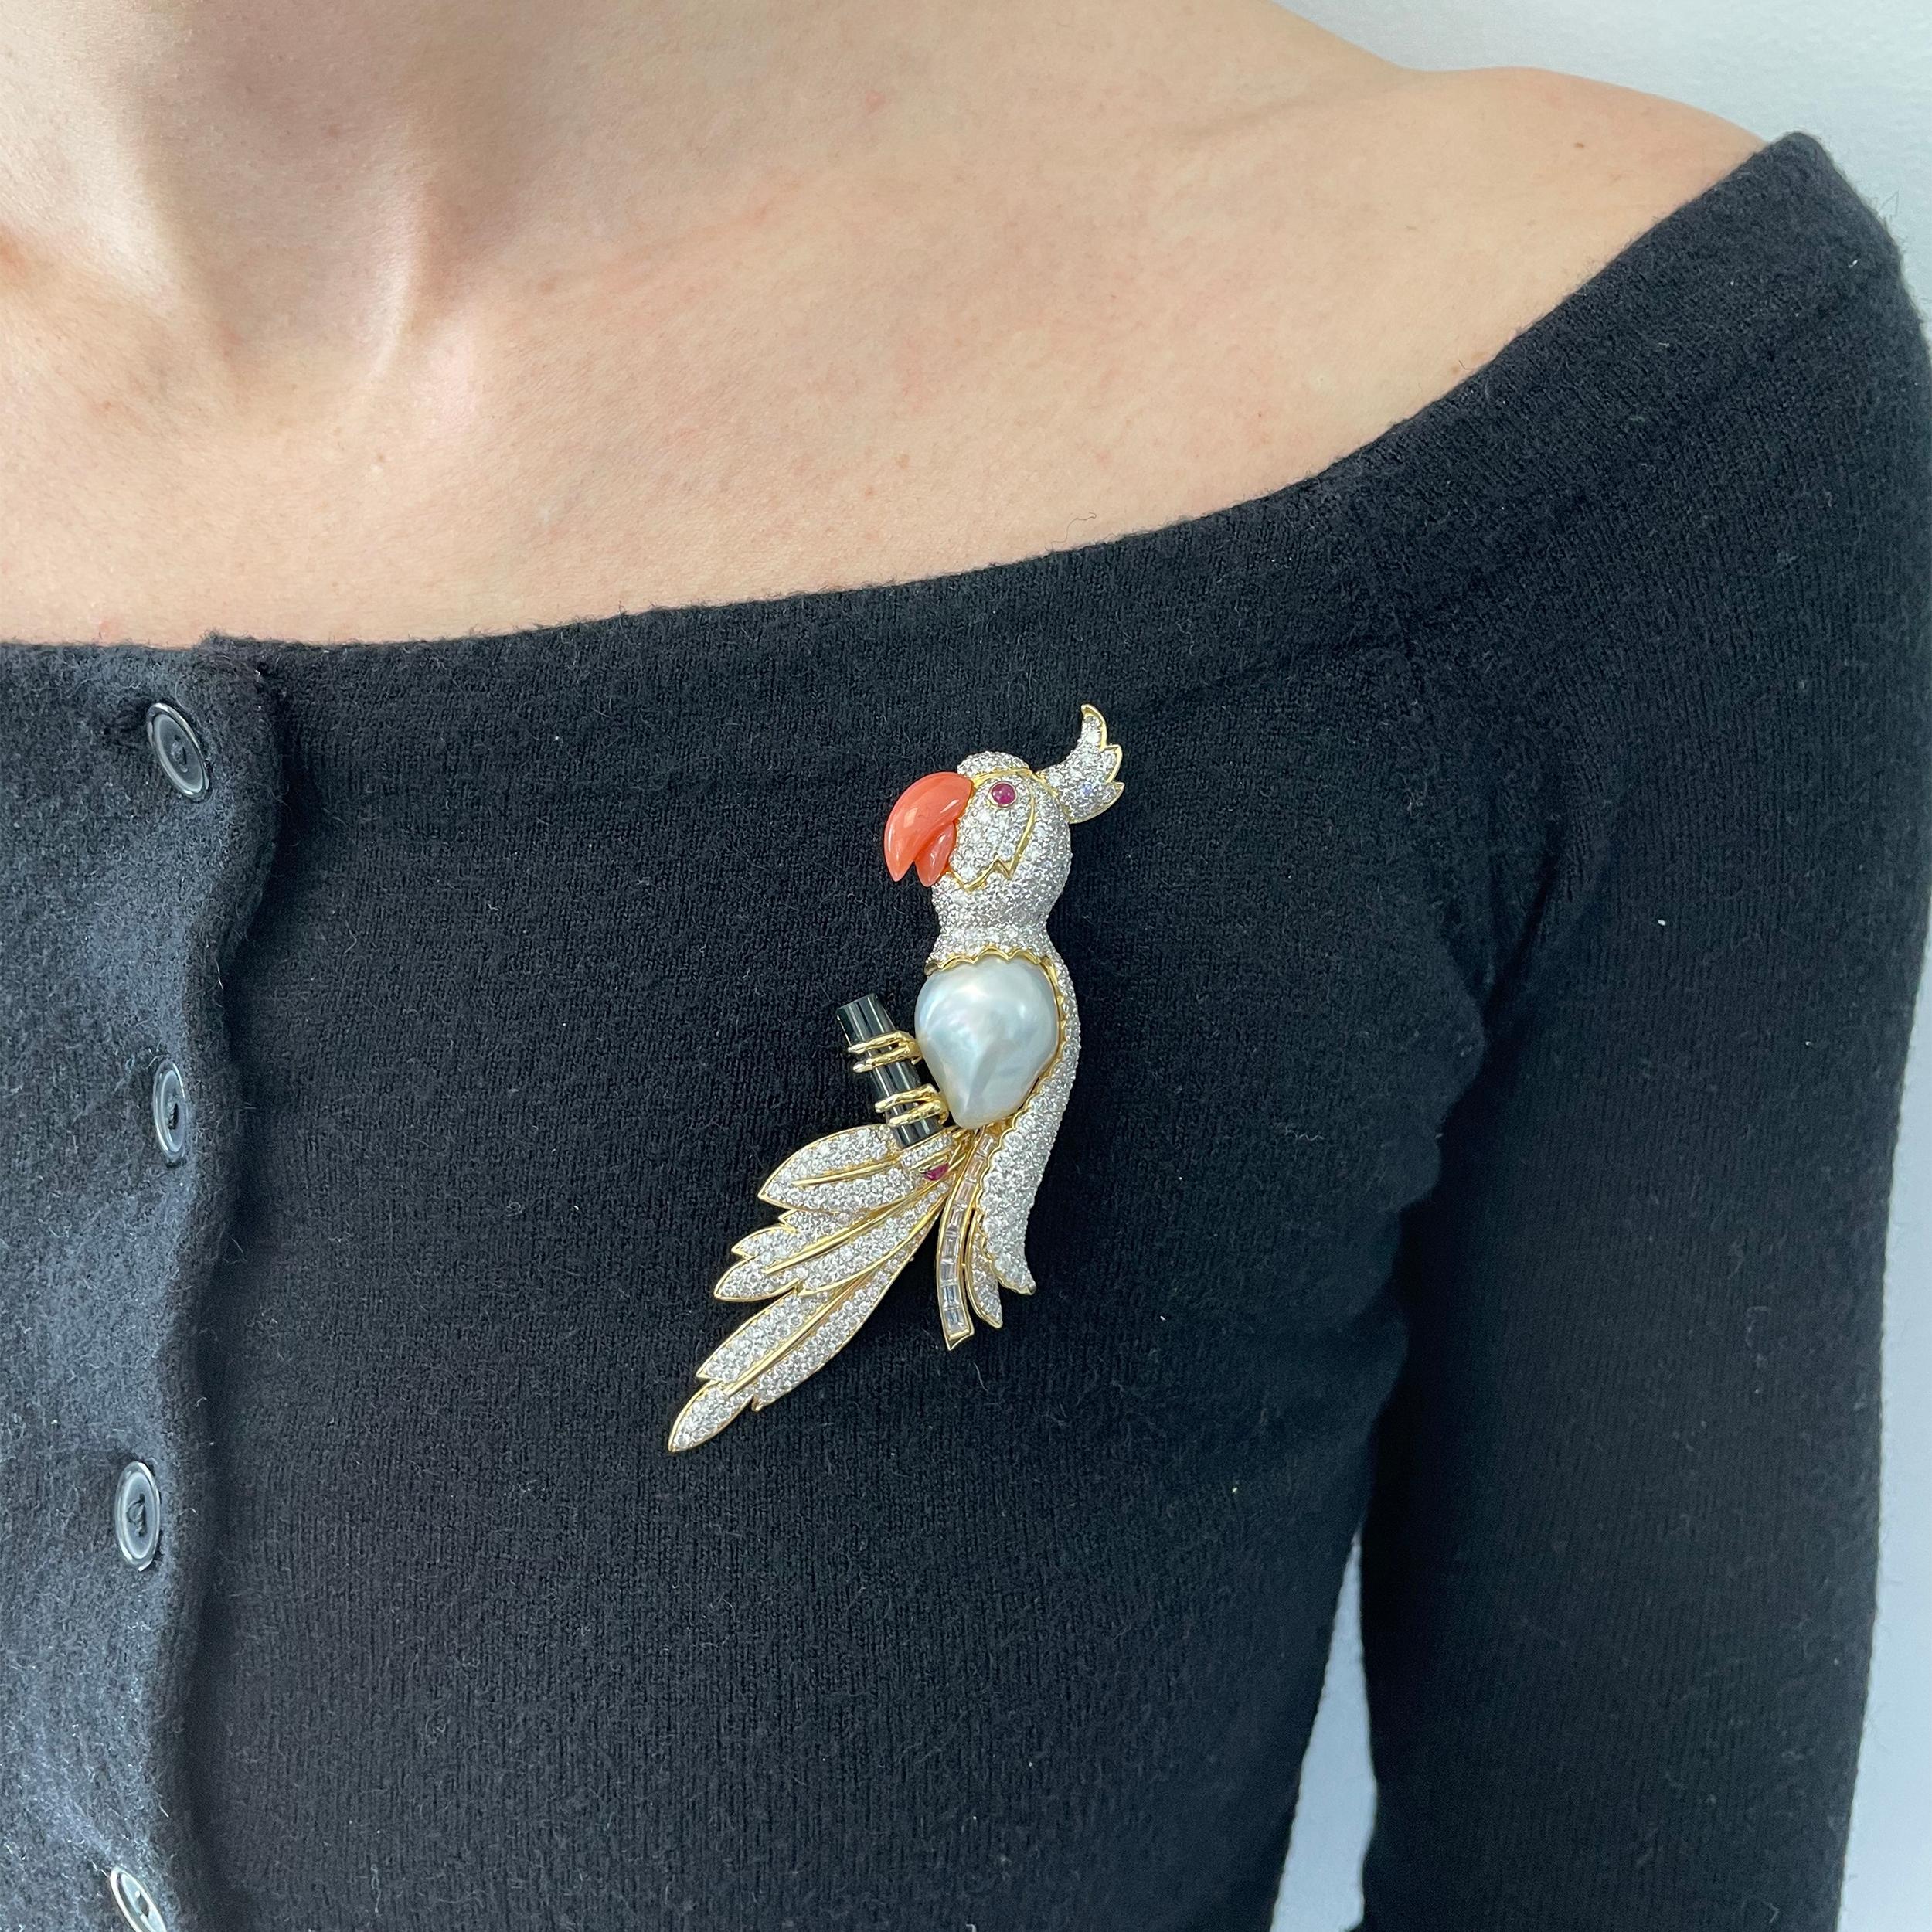 Parrot brooch made in 18k yellow gold with gemstone accents.
The parrot's head, feathers and tail encrusted with approximately 390
round brilliant cut and 8 baguette cut diamonds weighing total of approximately 9.50ct-10.50carats color H-I, clarity